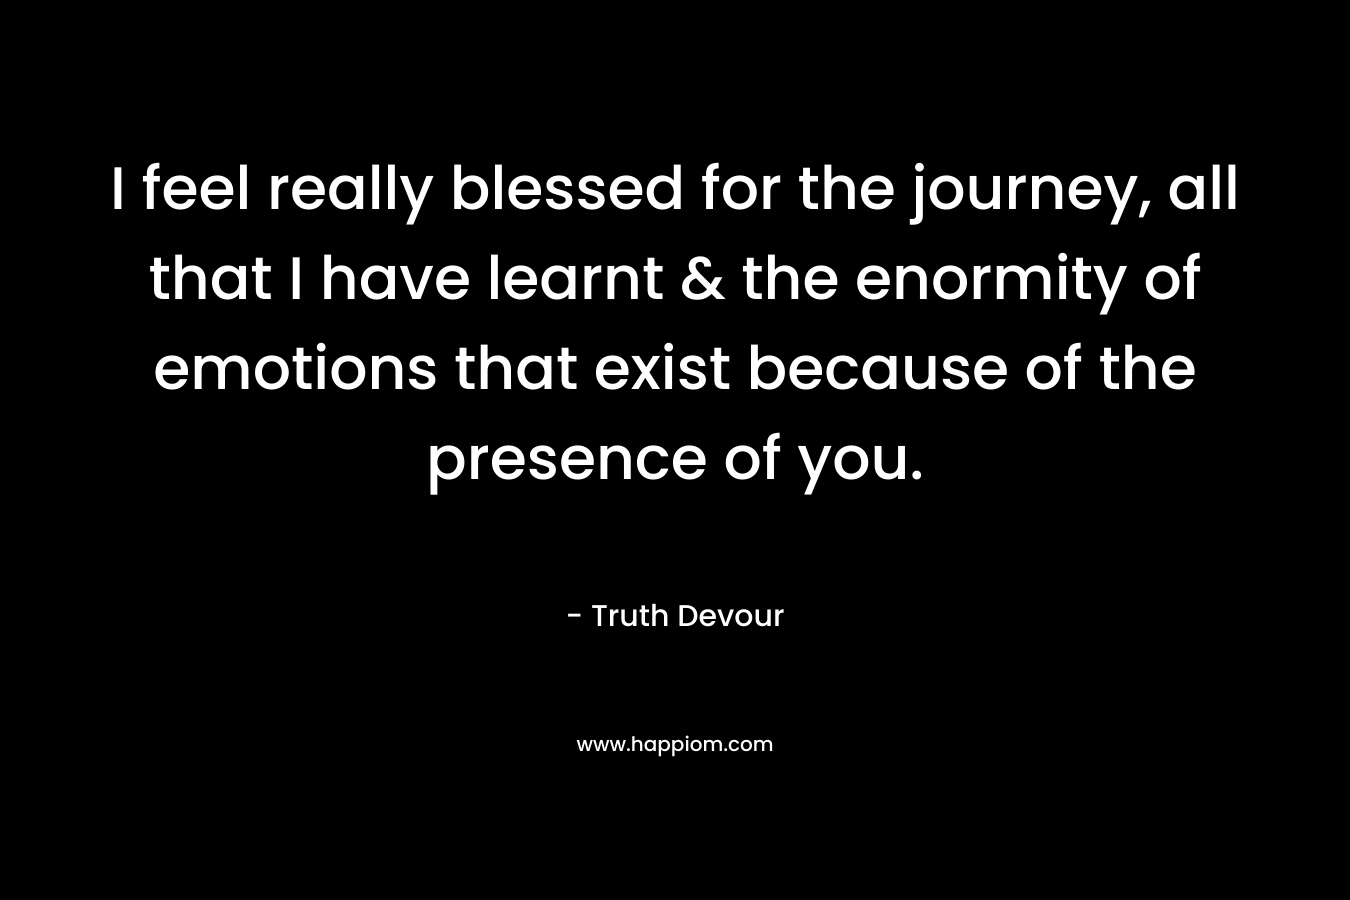 I feel really blessed for the journey, all that I have learnt & the enormity of emotions that exist because of the presence of you. – Truth Devour